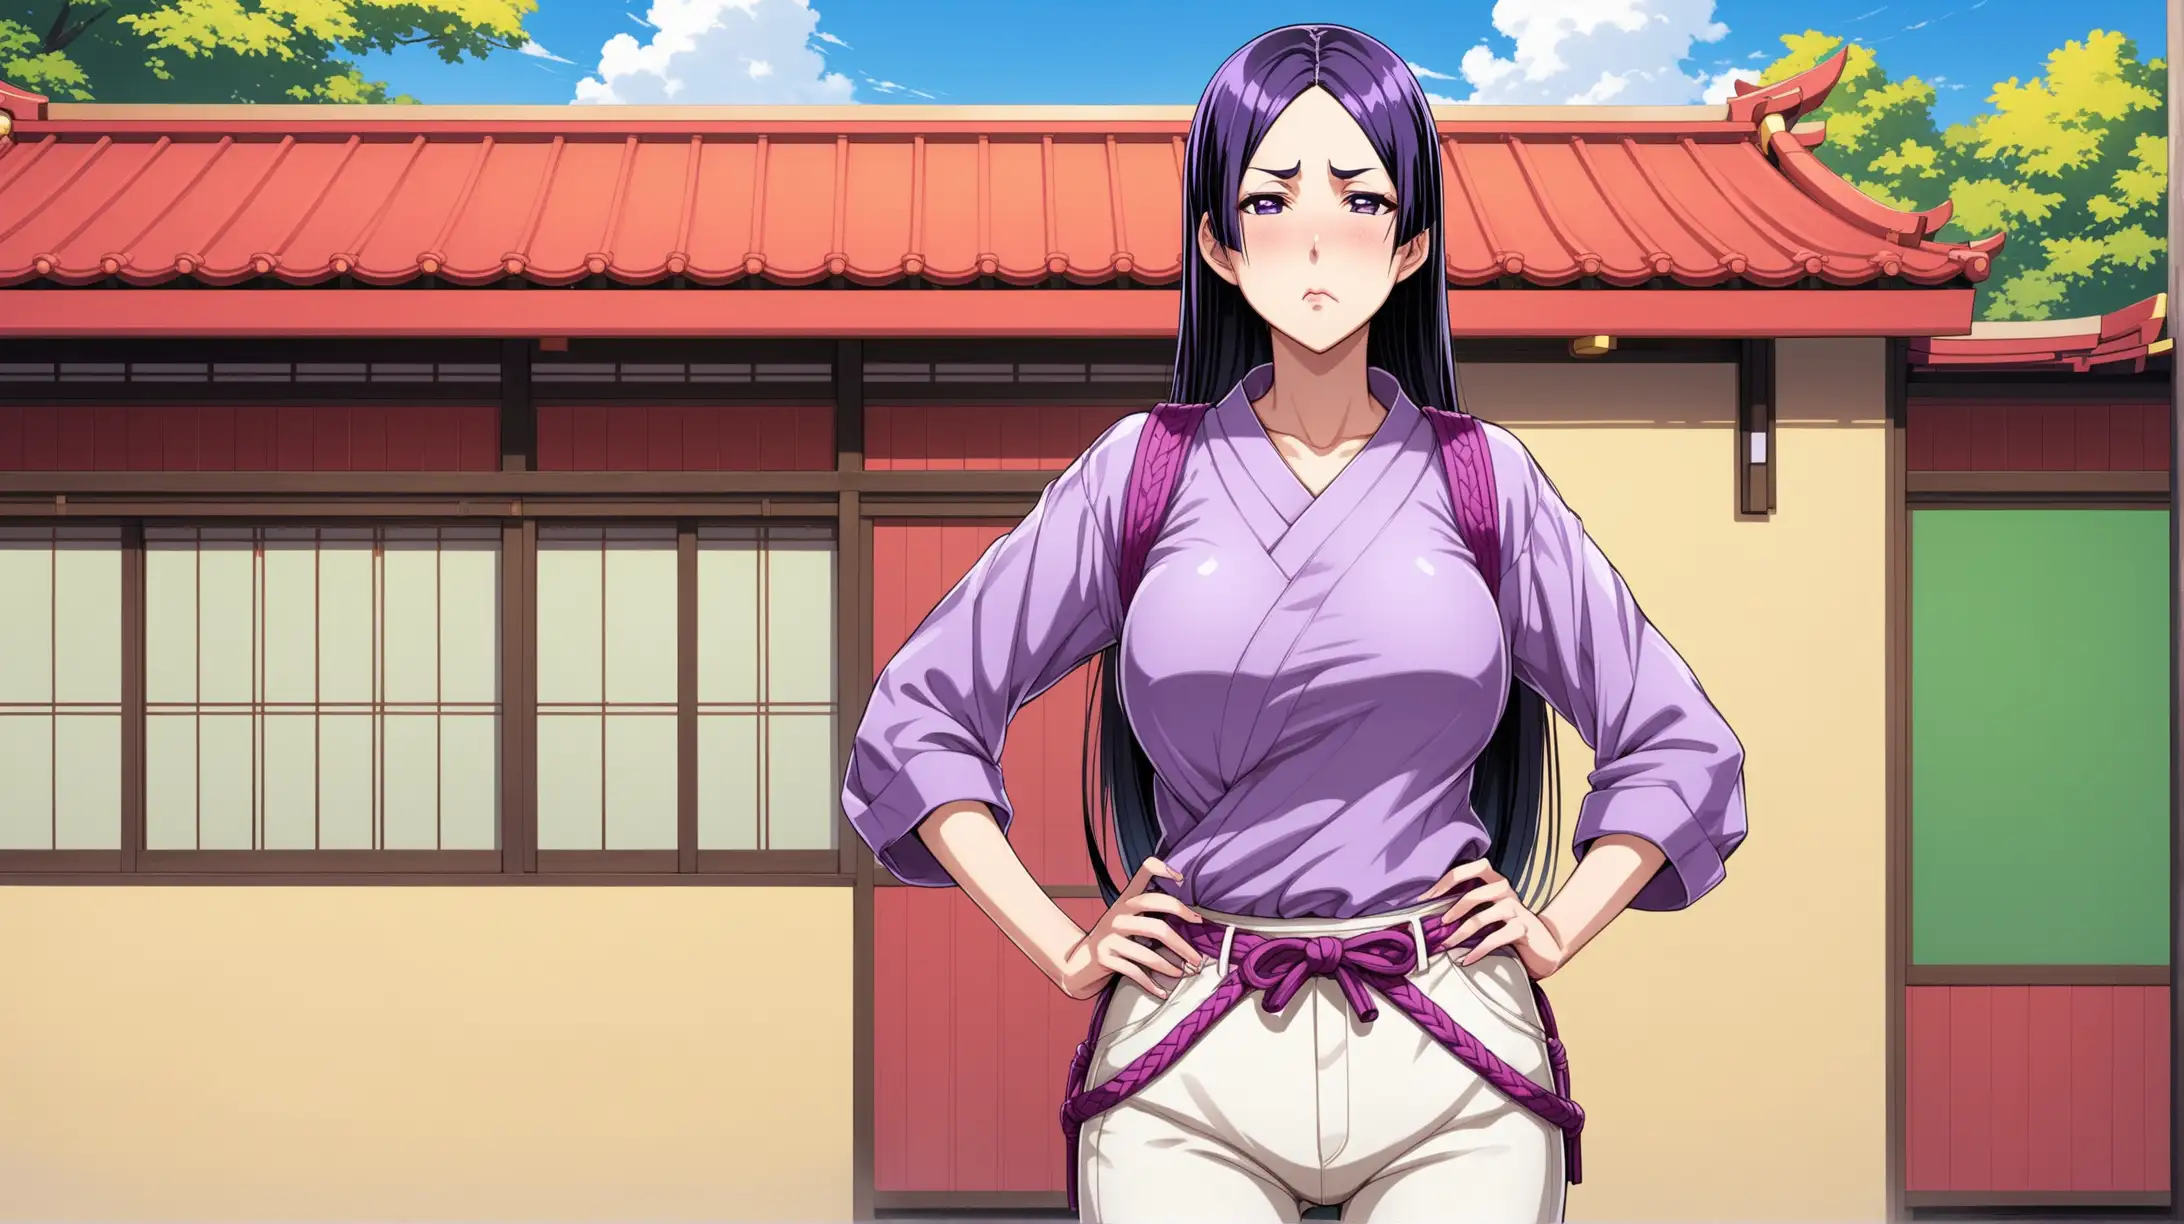 Draw the character Minamoto no Raikou, high quality, standing outside on a sunny day, with her hands on her hips, wearing casual clothes, making a pouty face at the viewer